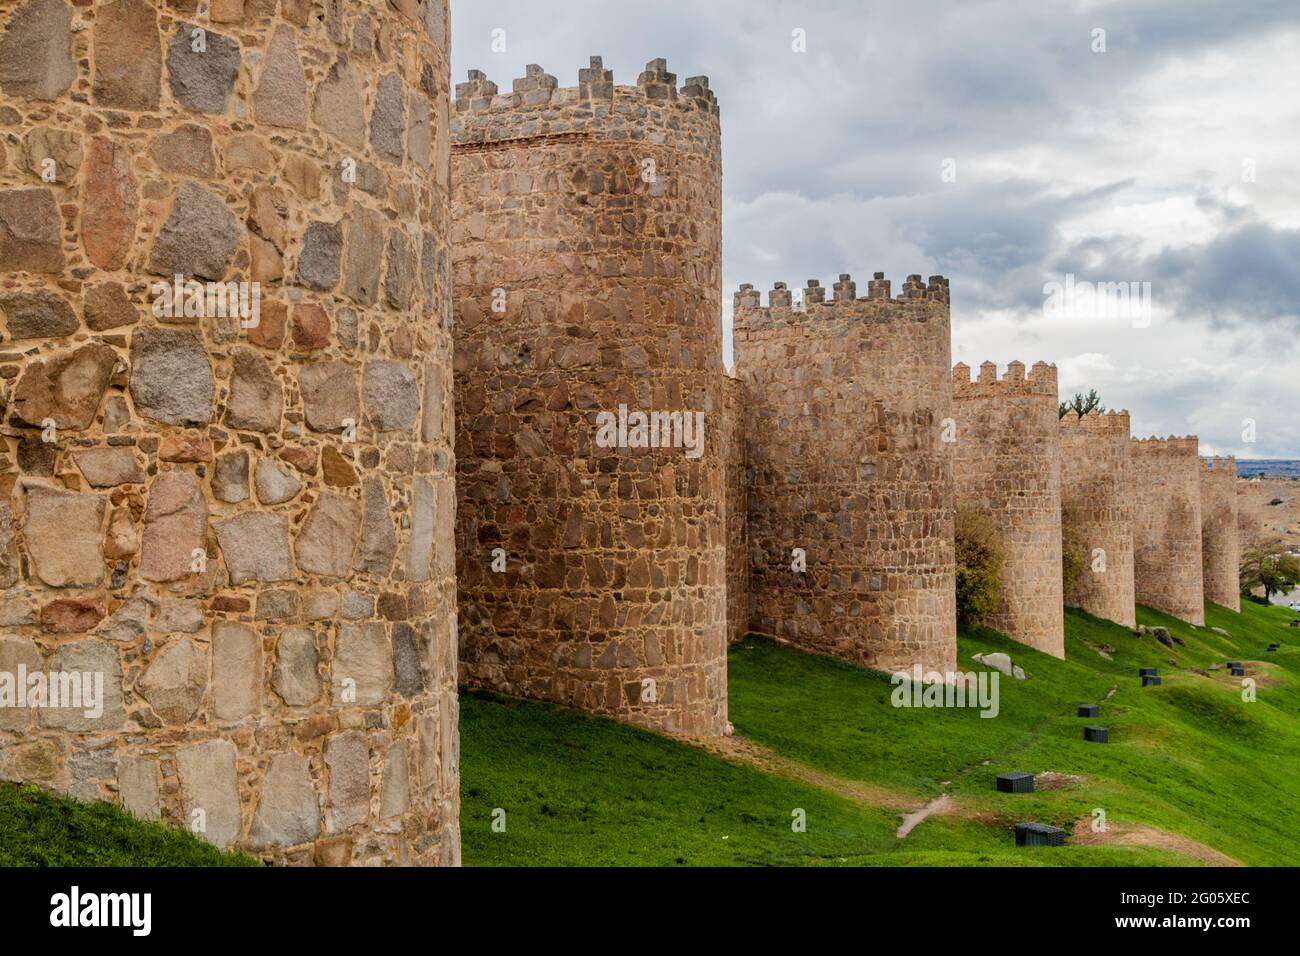 Fortification walls of the old town in Avila, Spain. Stock Photo